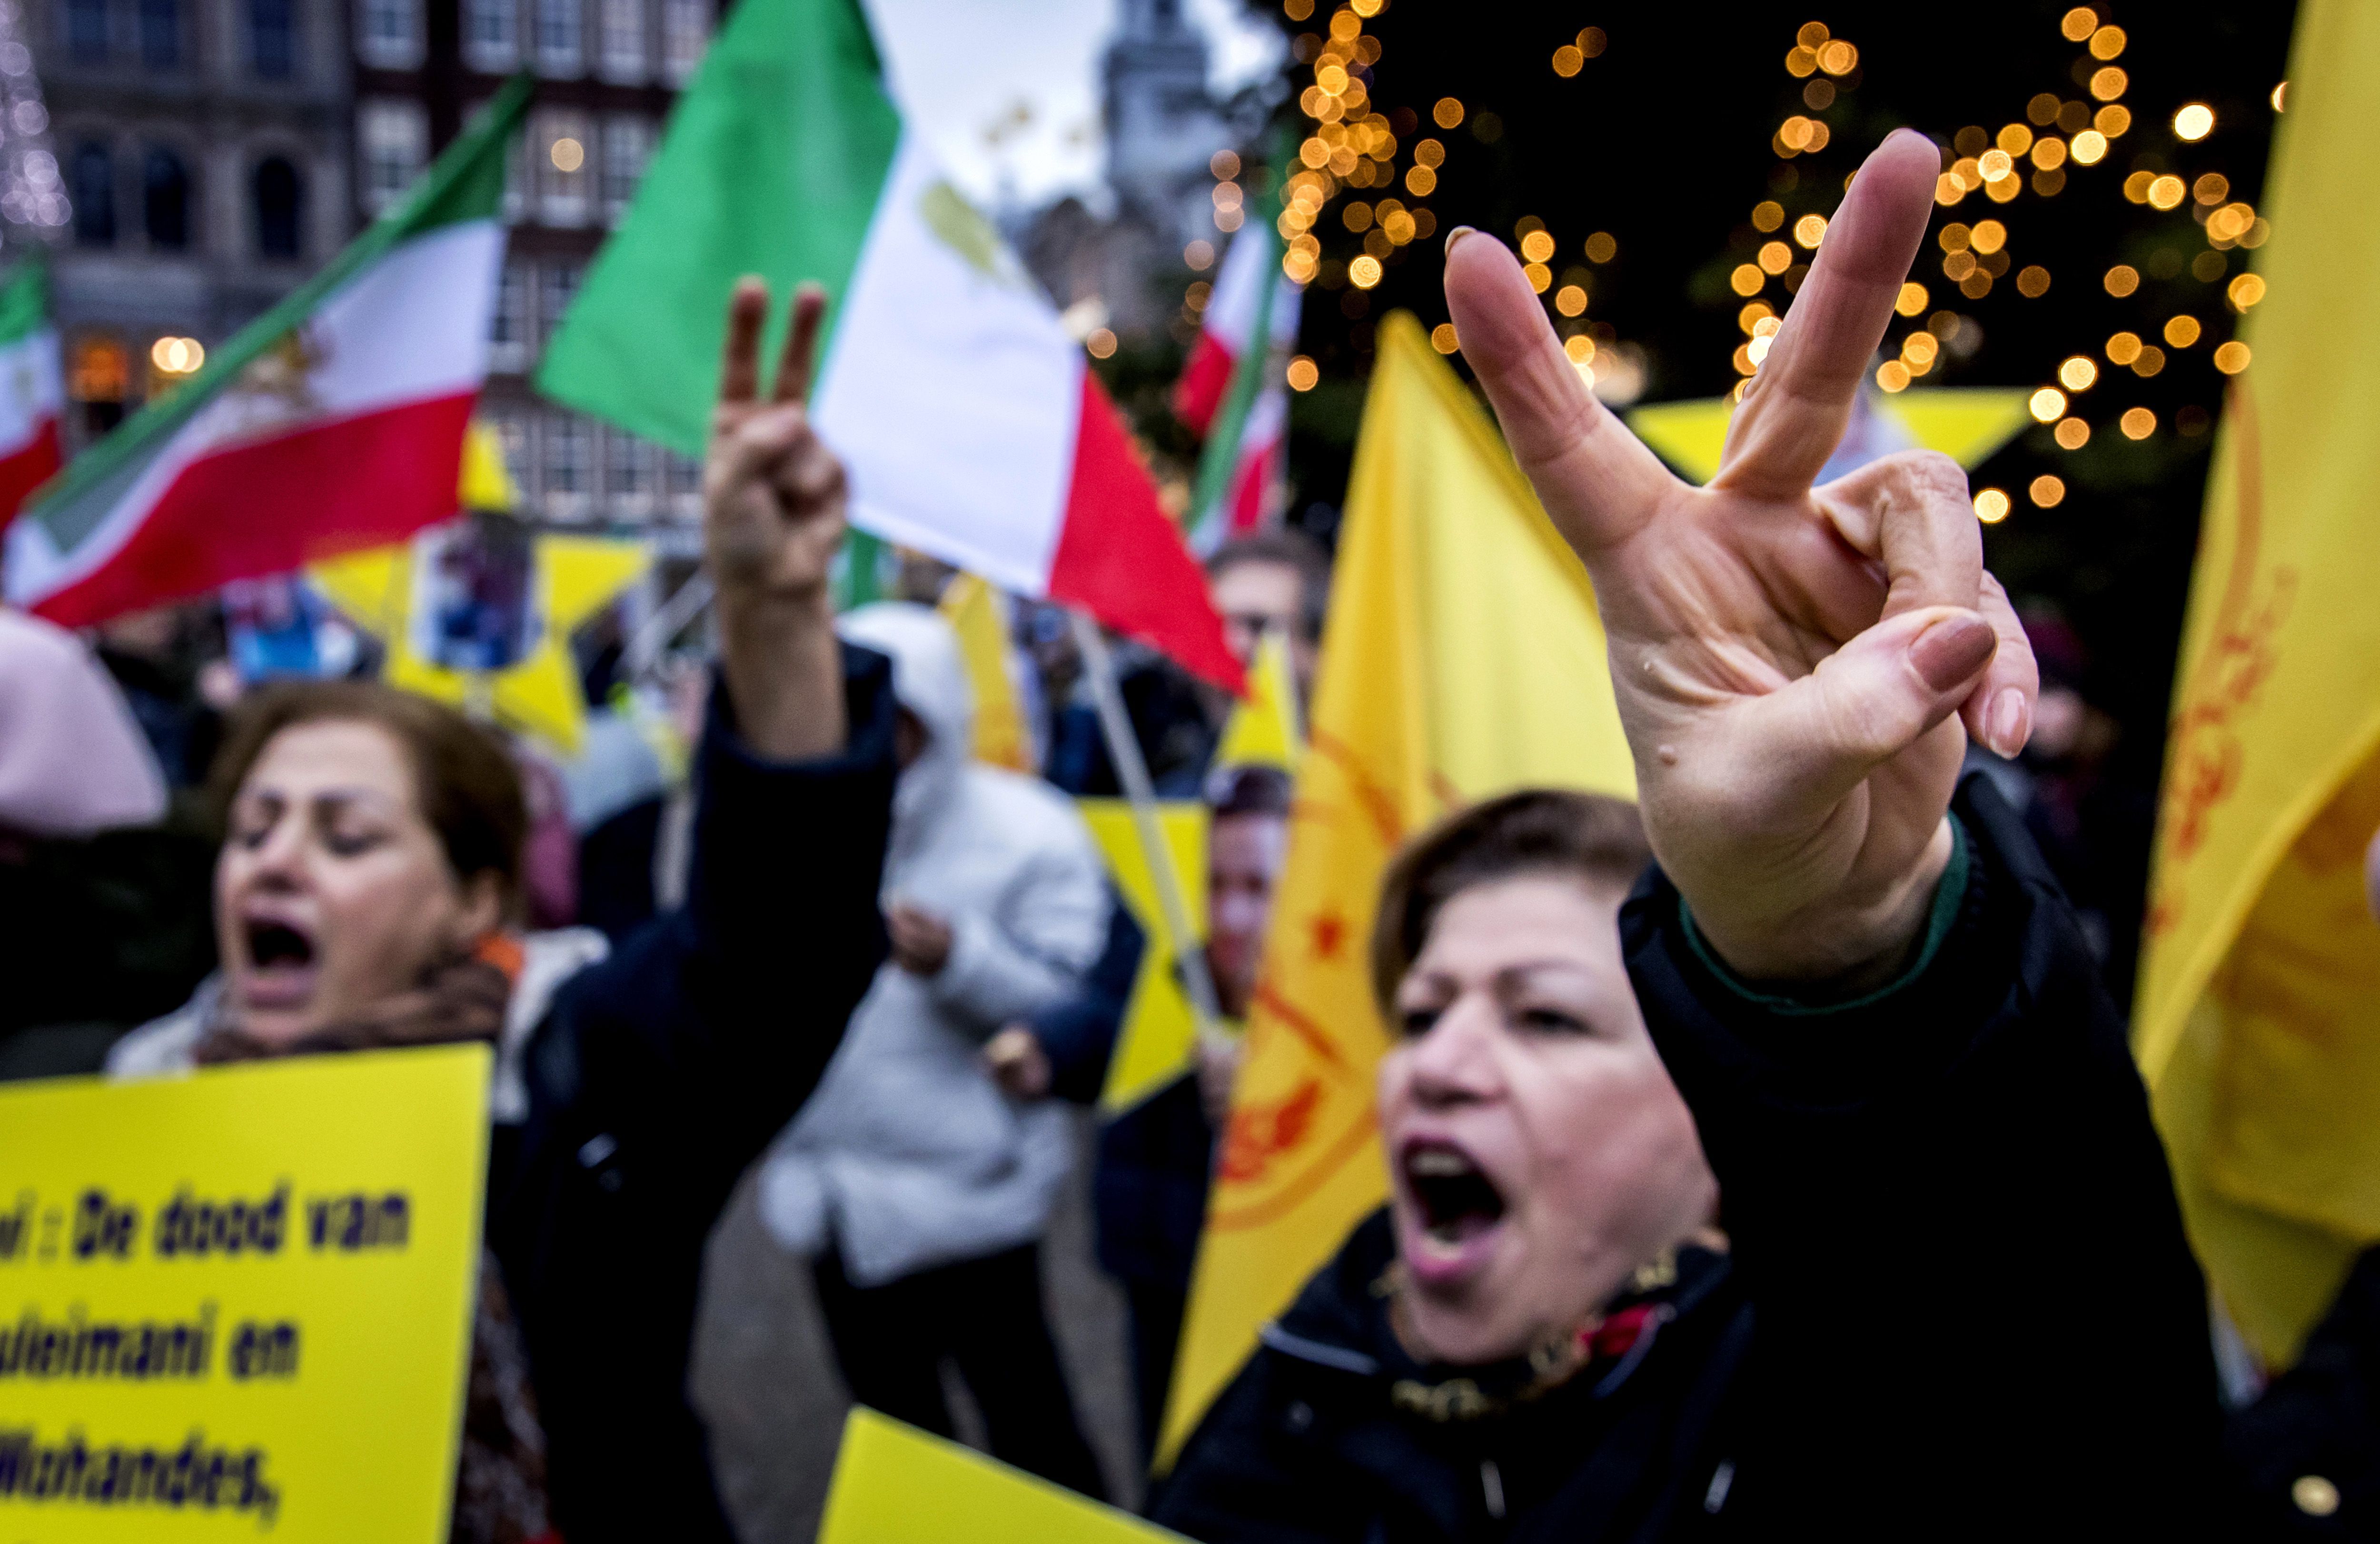 Iranian protestors flash the victory sign during a protest action on Dam Square, Amsterdam, on January 4